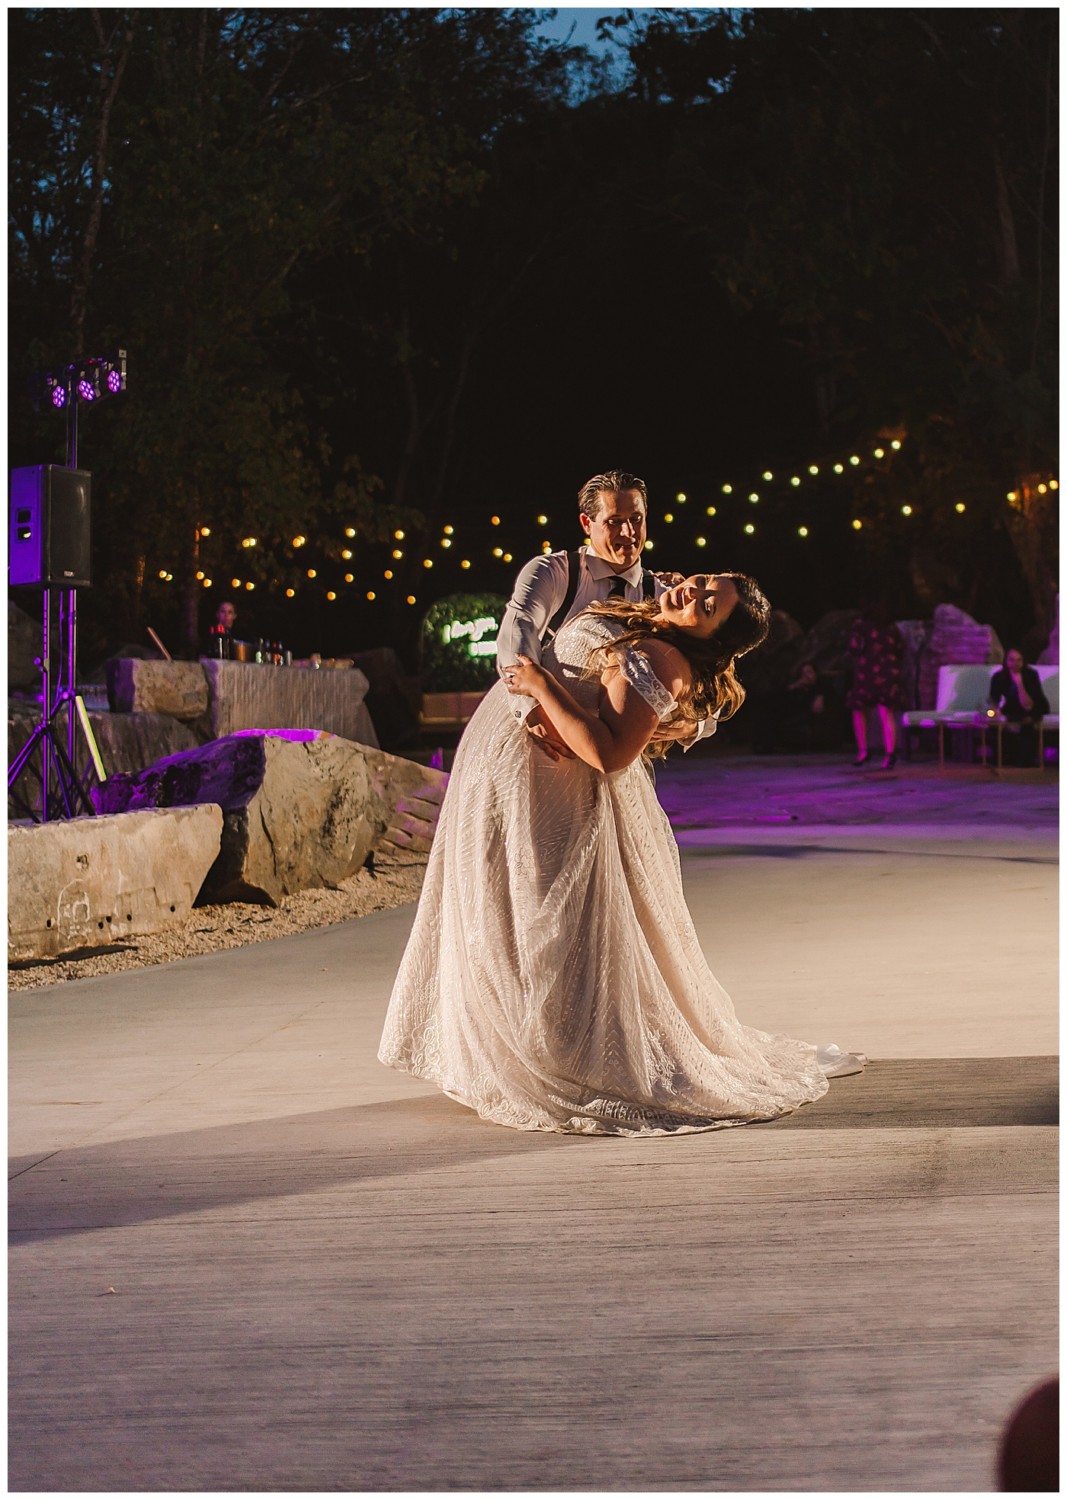 The Quarry Knoxville Bride and Groom Dance